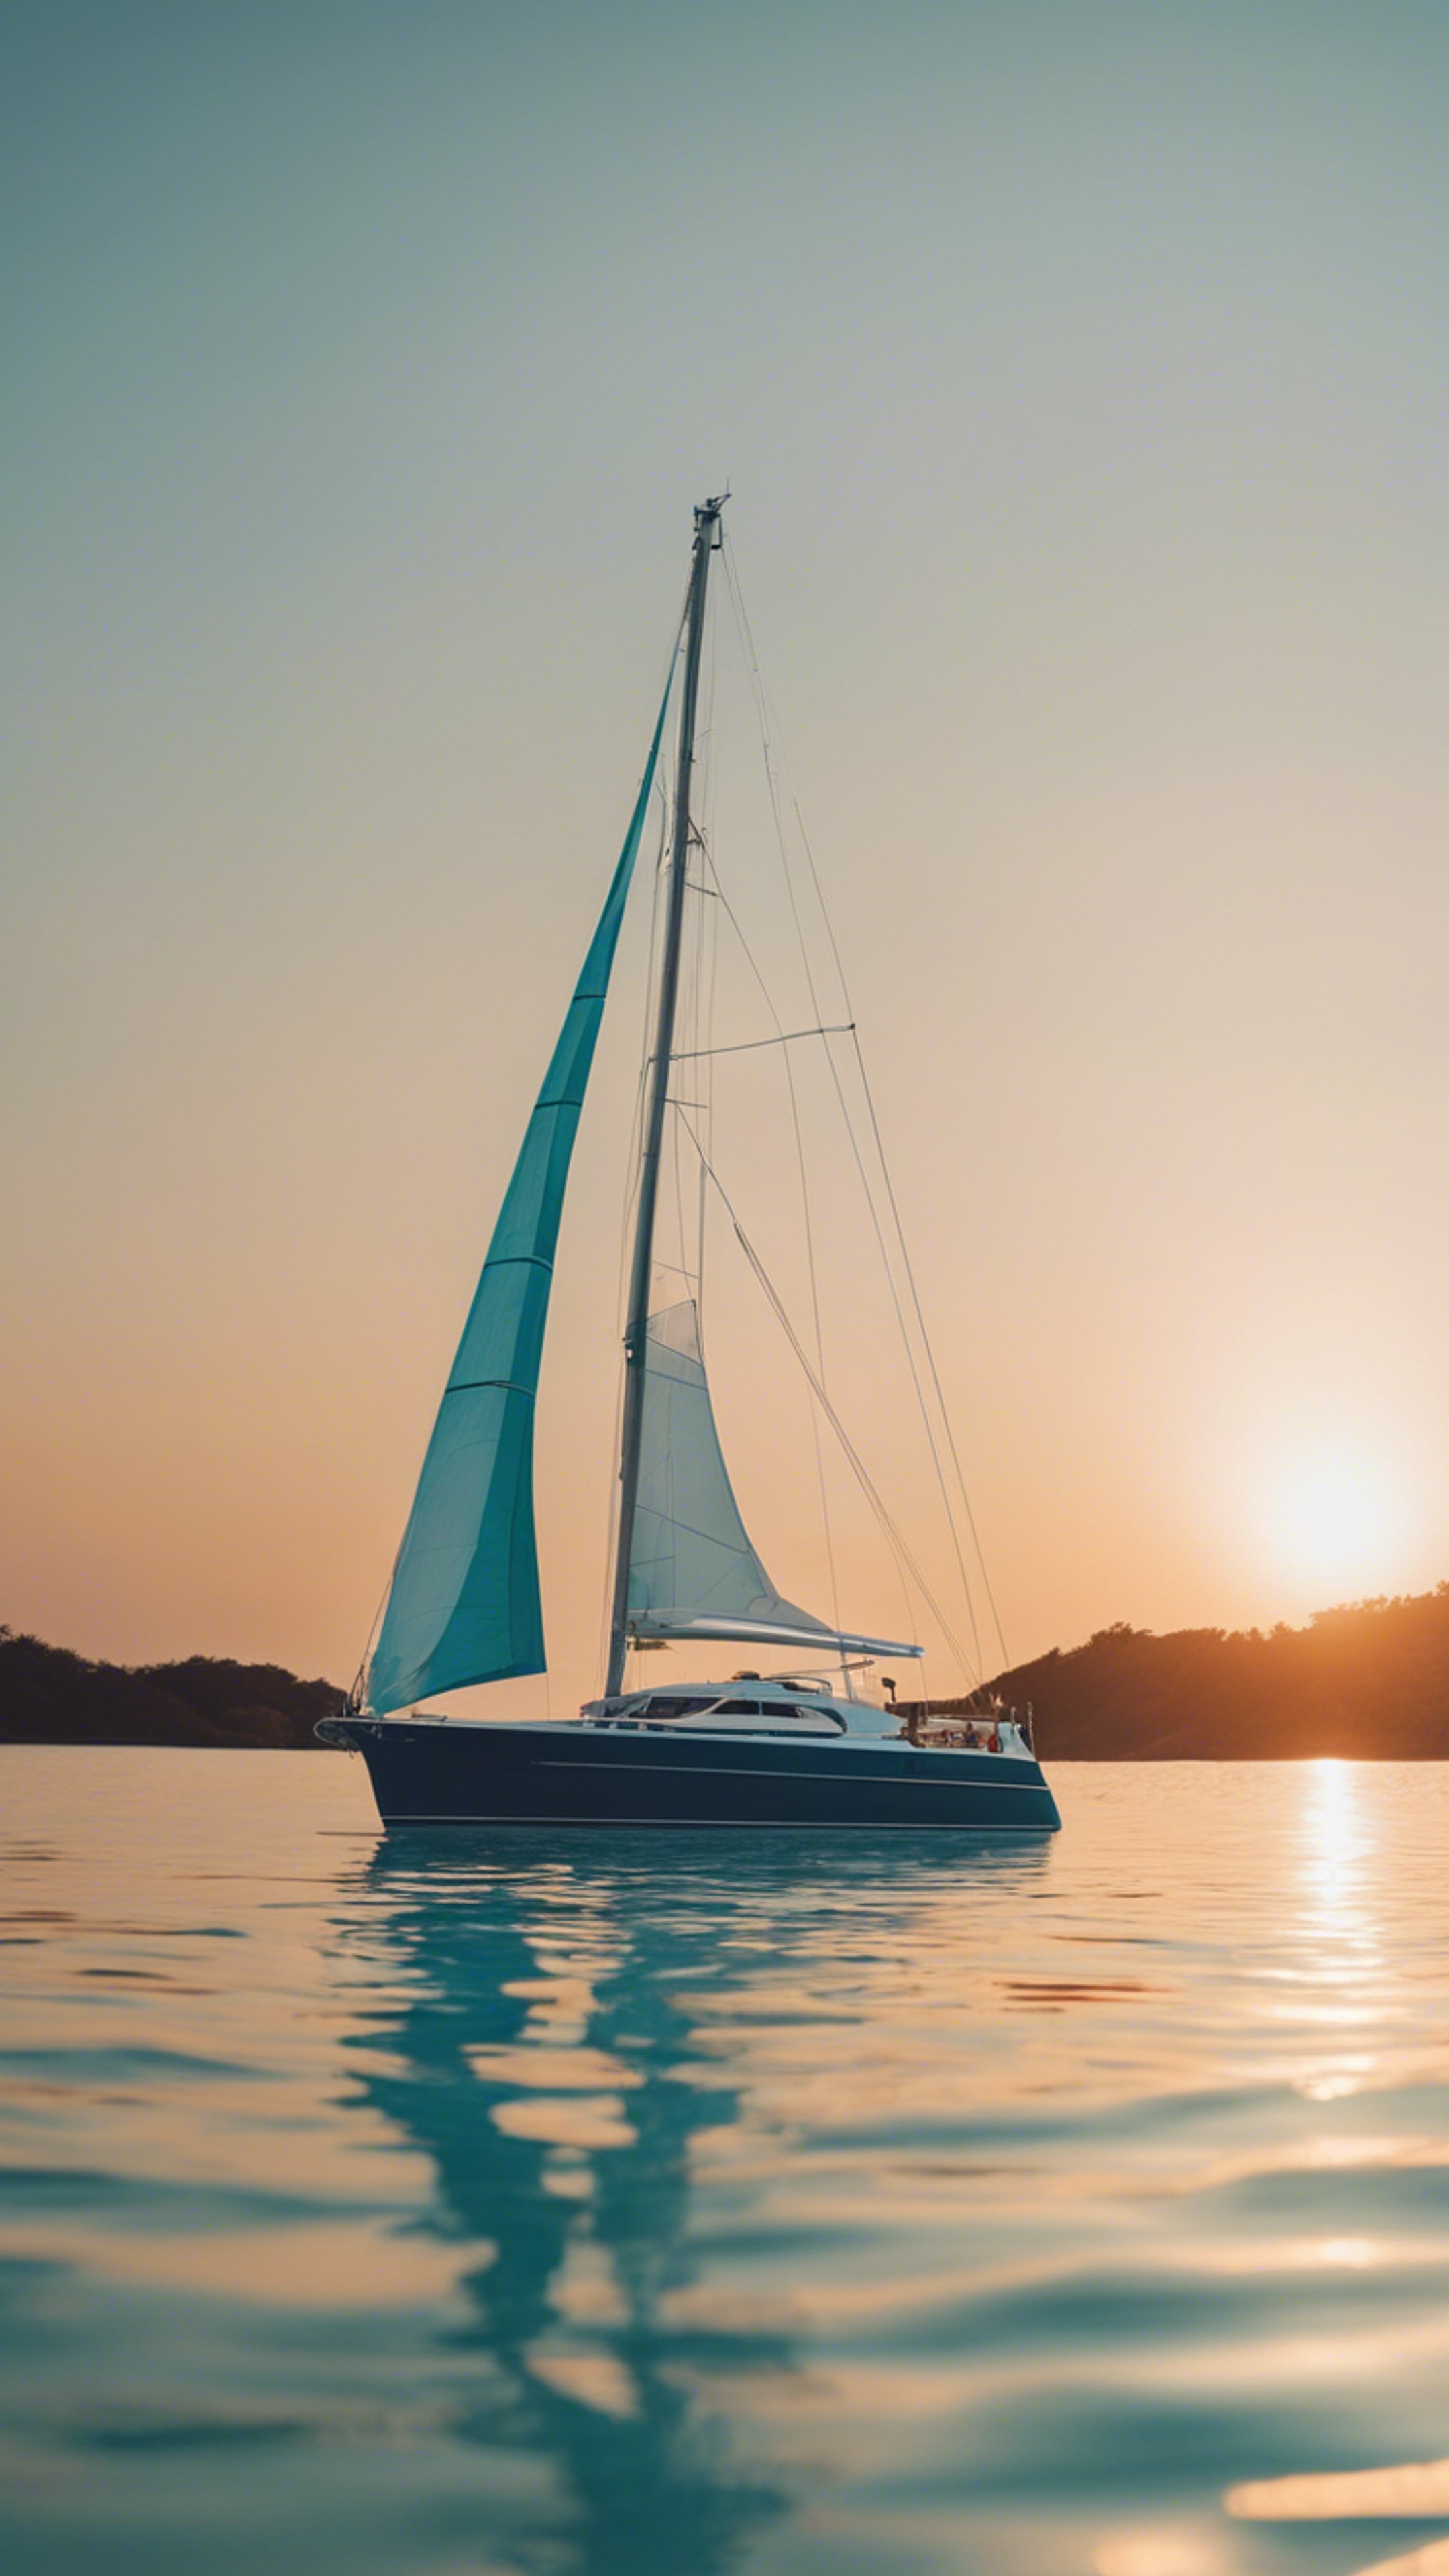 A preppy blue yacht sailing calmly on clear aquamarine waters at sunset. ផ្ទាំង​រូបភាព[1bfcce9f38c64176b950]